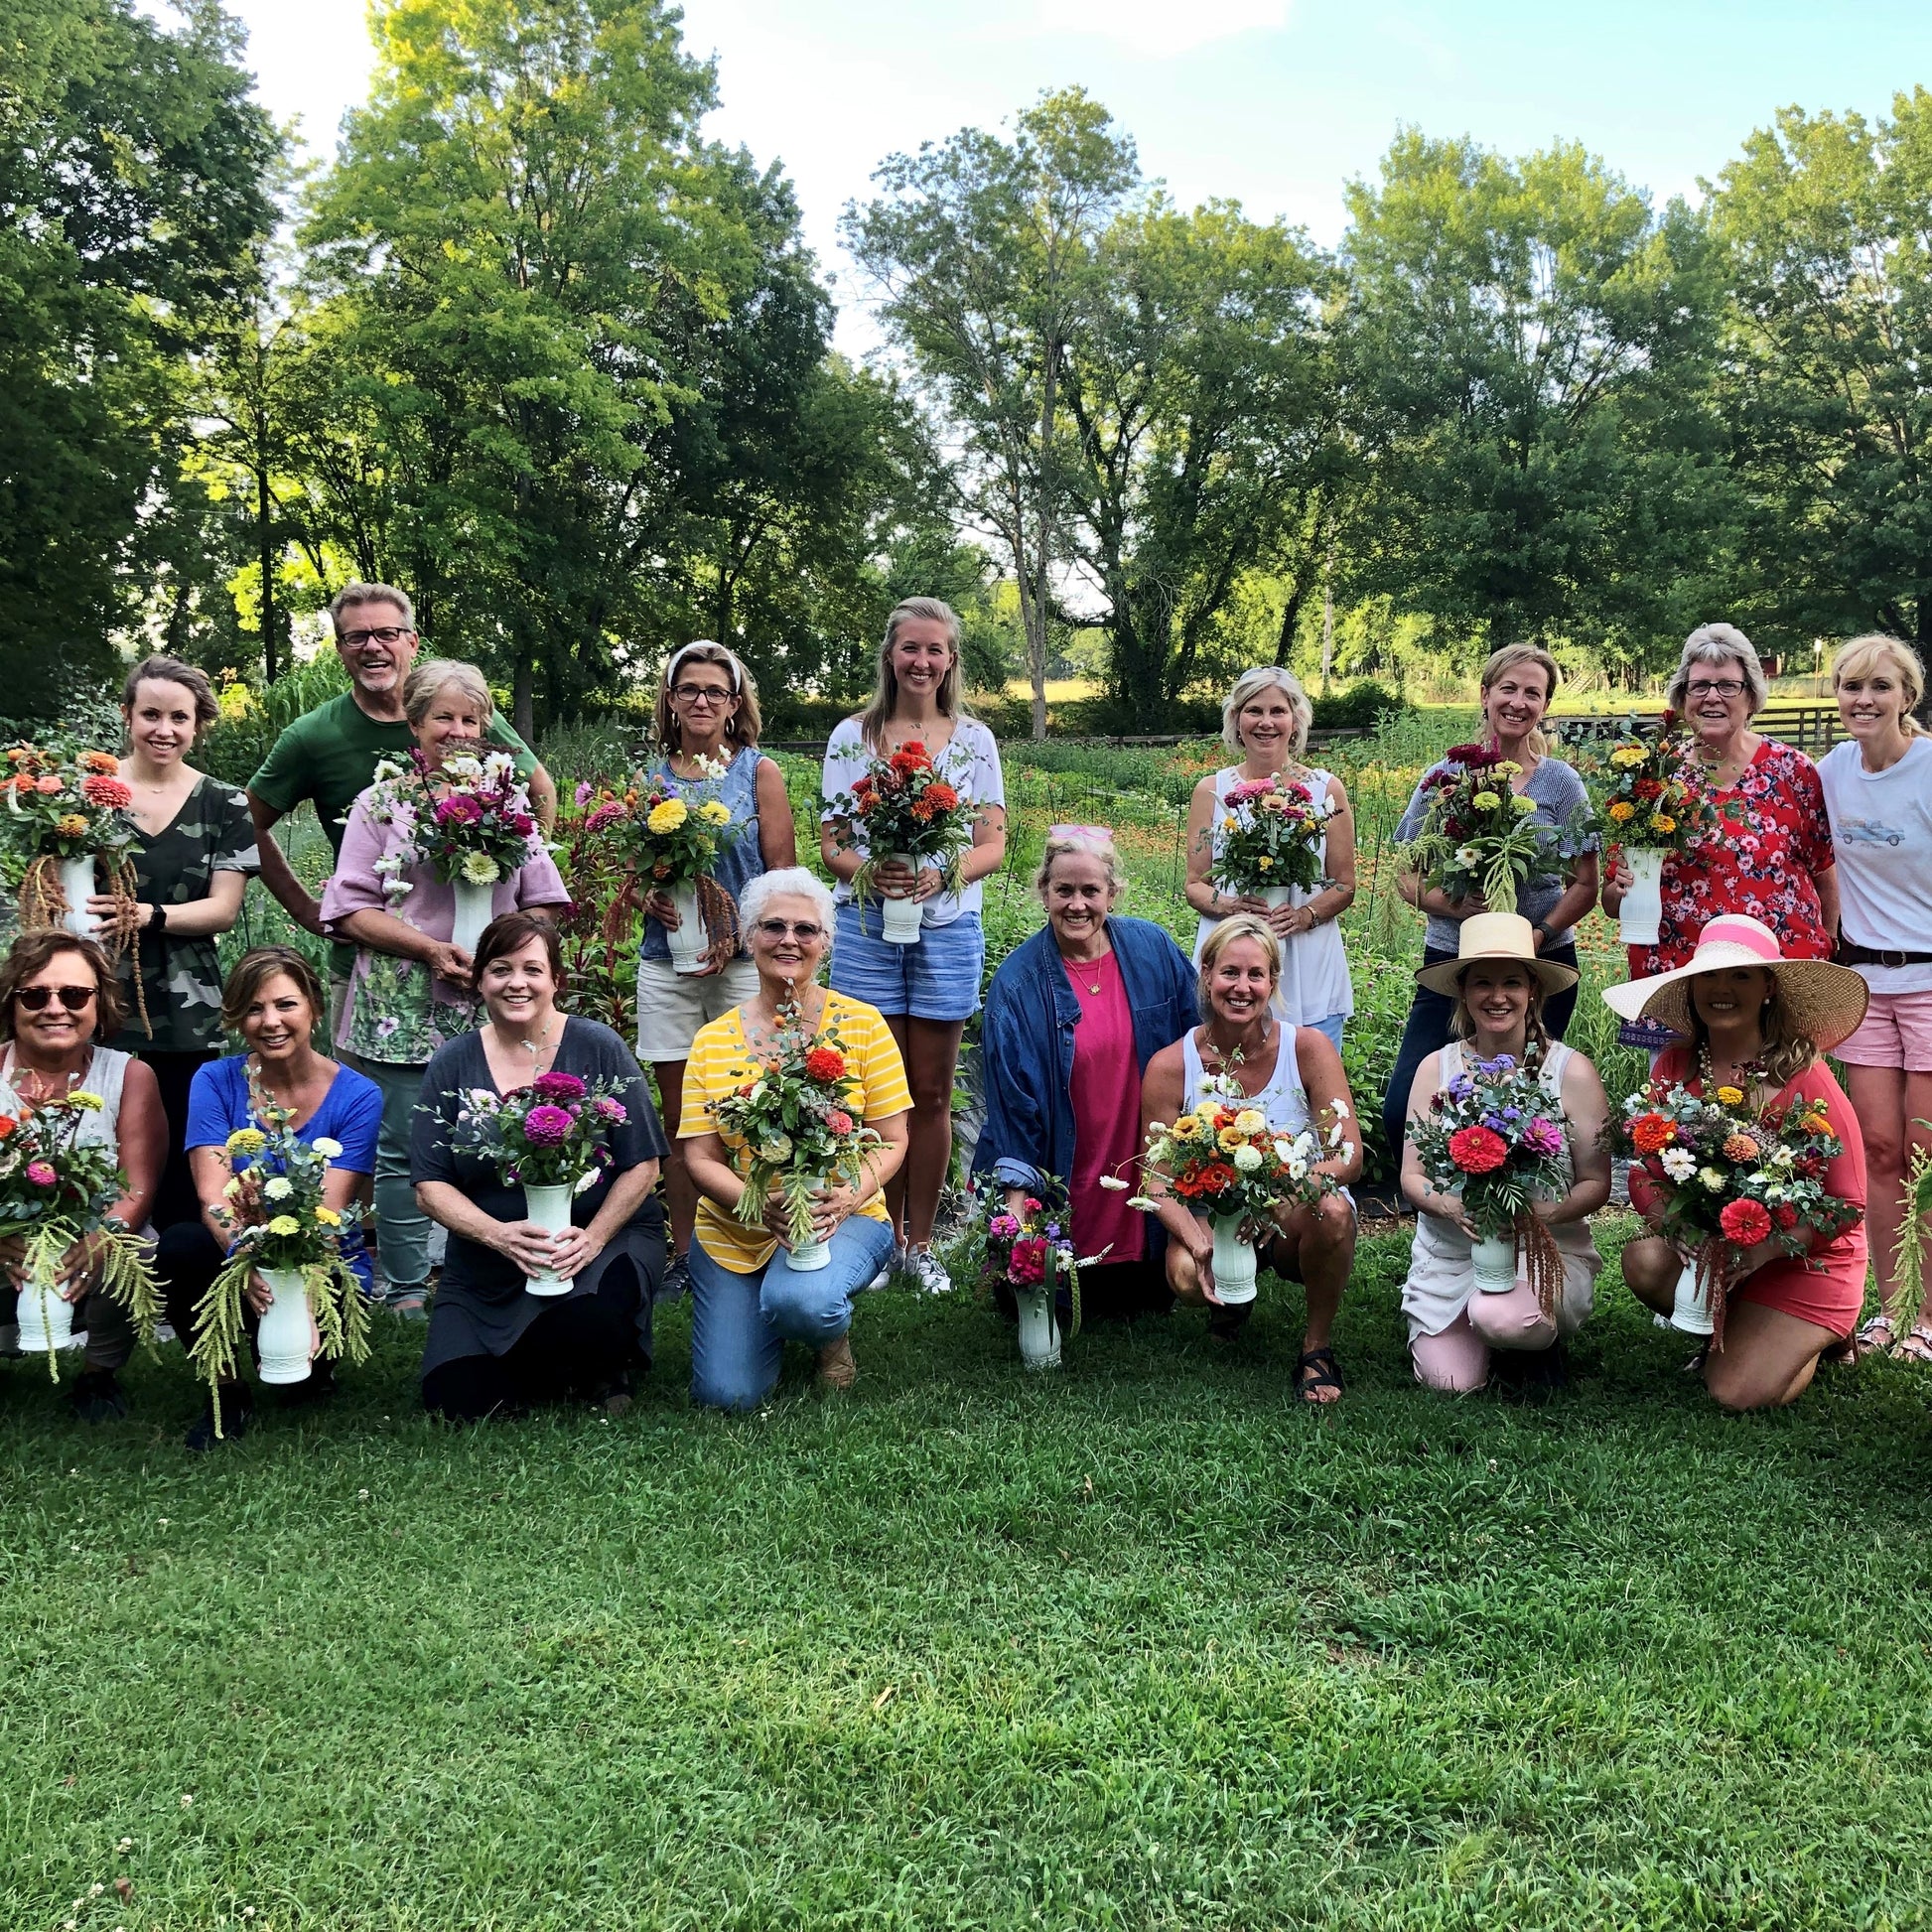 Bloom Stroll and Bouquet Workshop Classes & Events 1818 Farms   